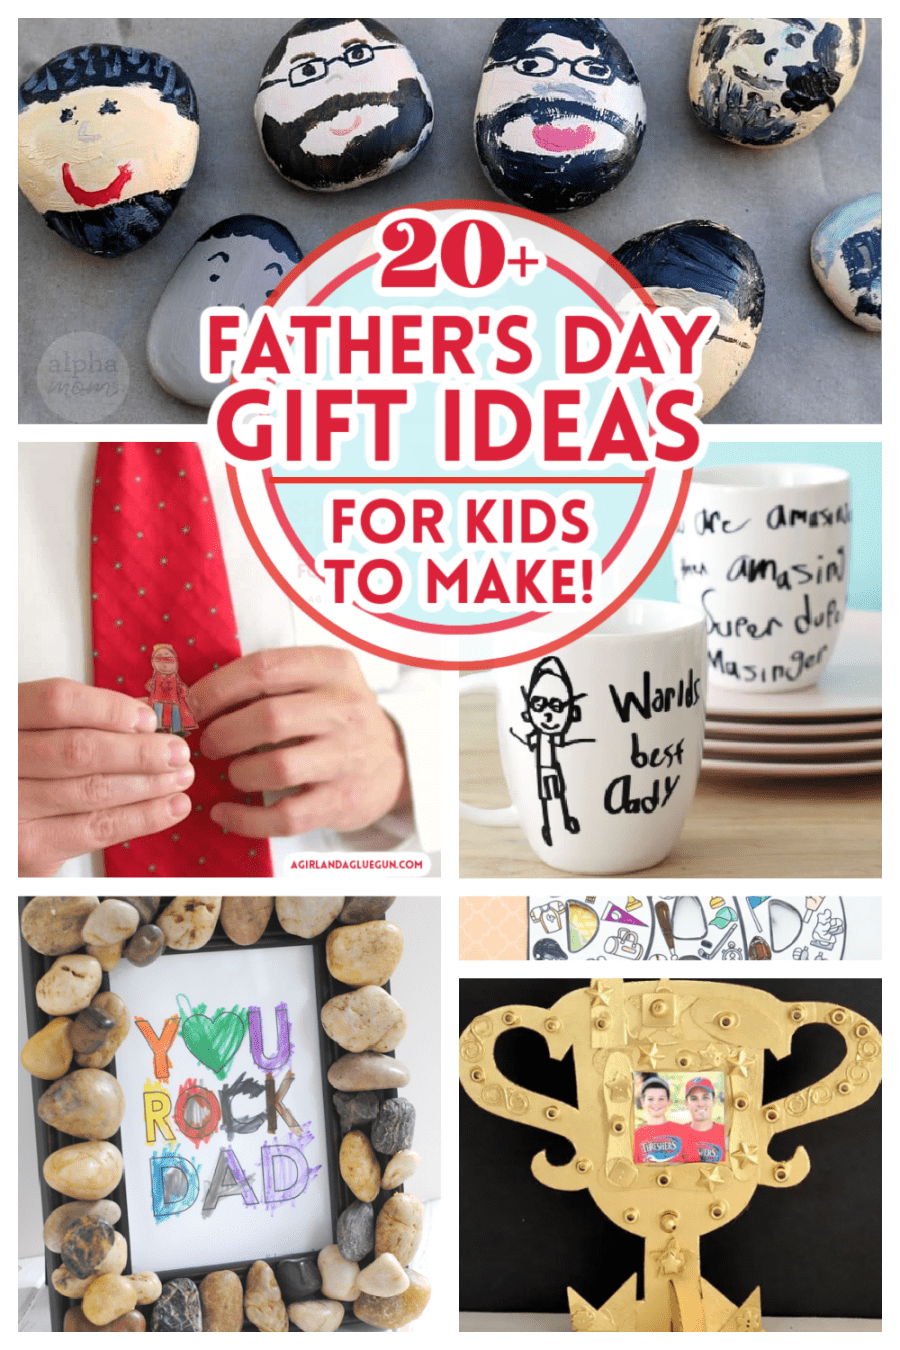 Father's Day Gift Guide - Carolina Charm